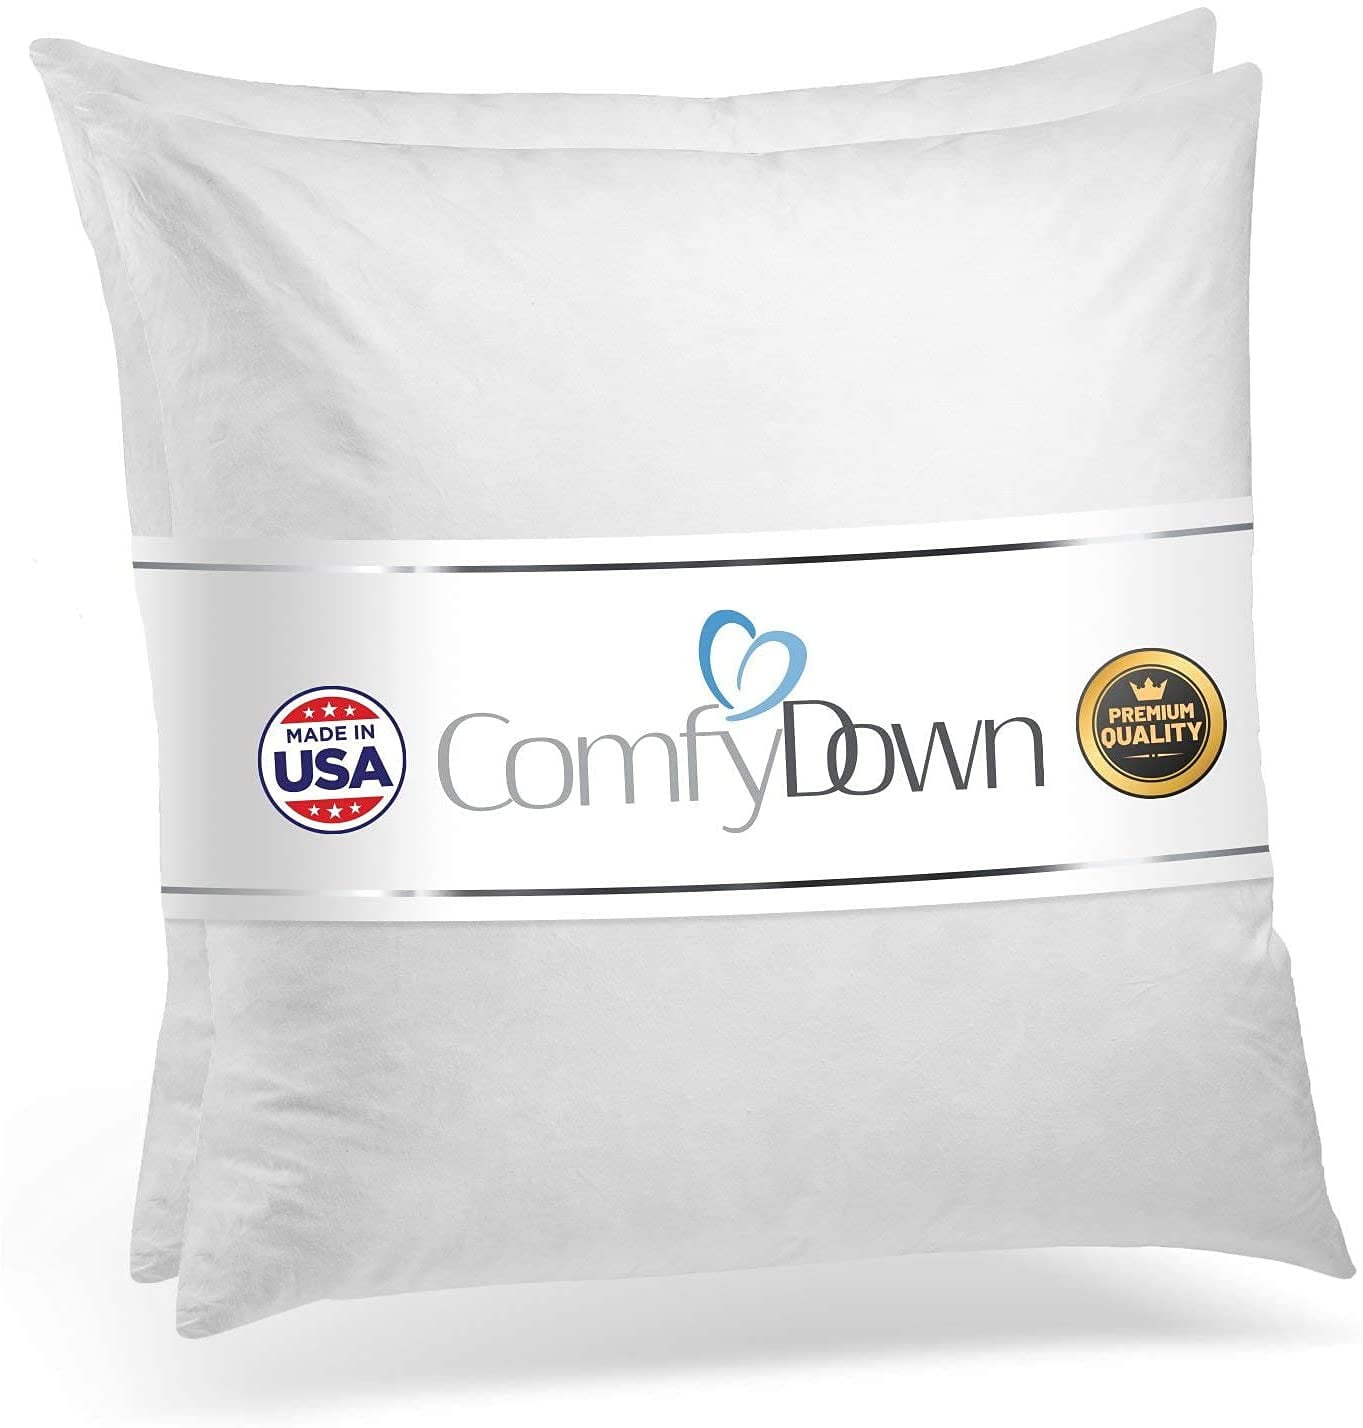 Polyester Pillow Inserts, Hypoallergenic Pillow Insert, Throw Pillow Insert  14x14, 16x16, 18x18, 20x20, 22x22, 24x24, 26x26, 28x28 Pillows 